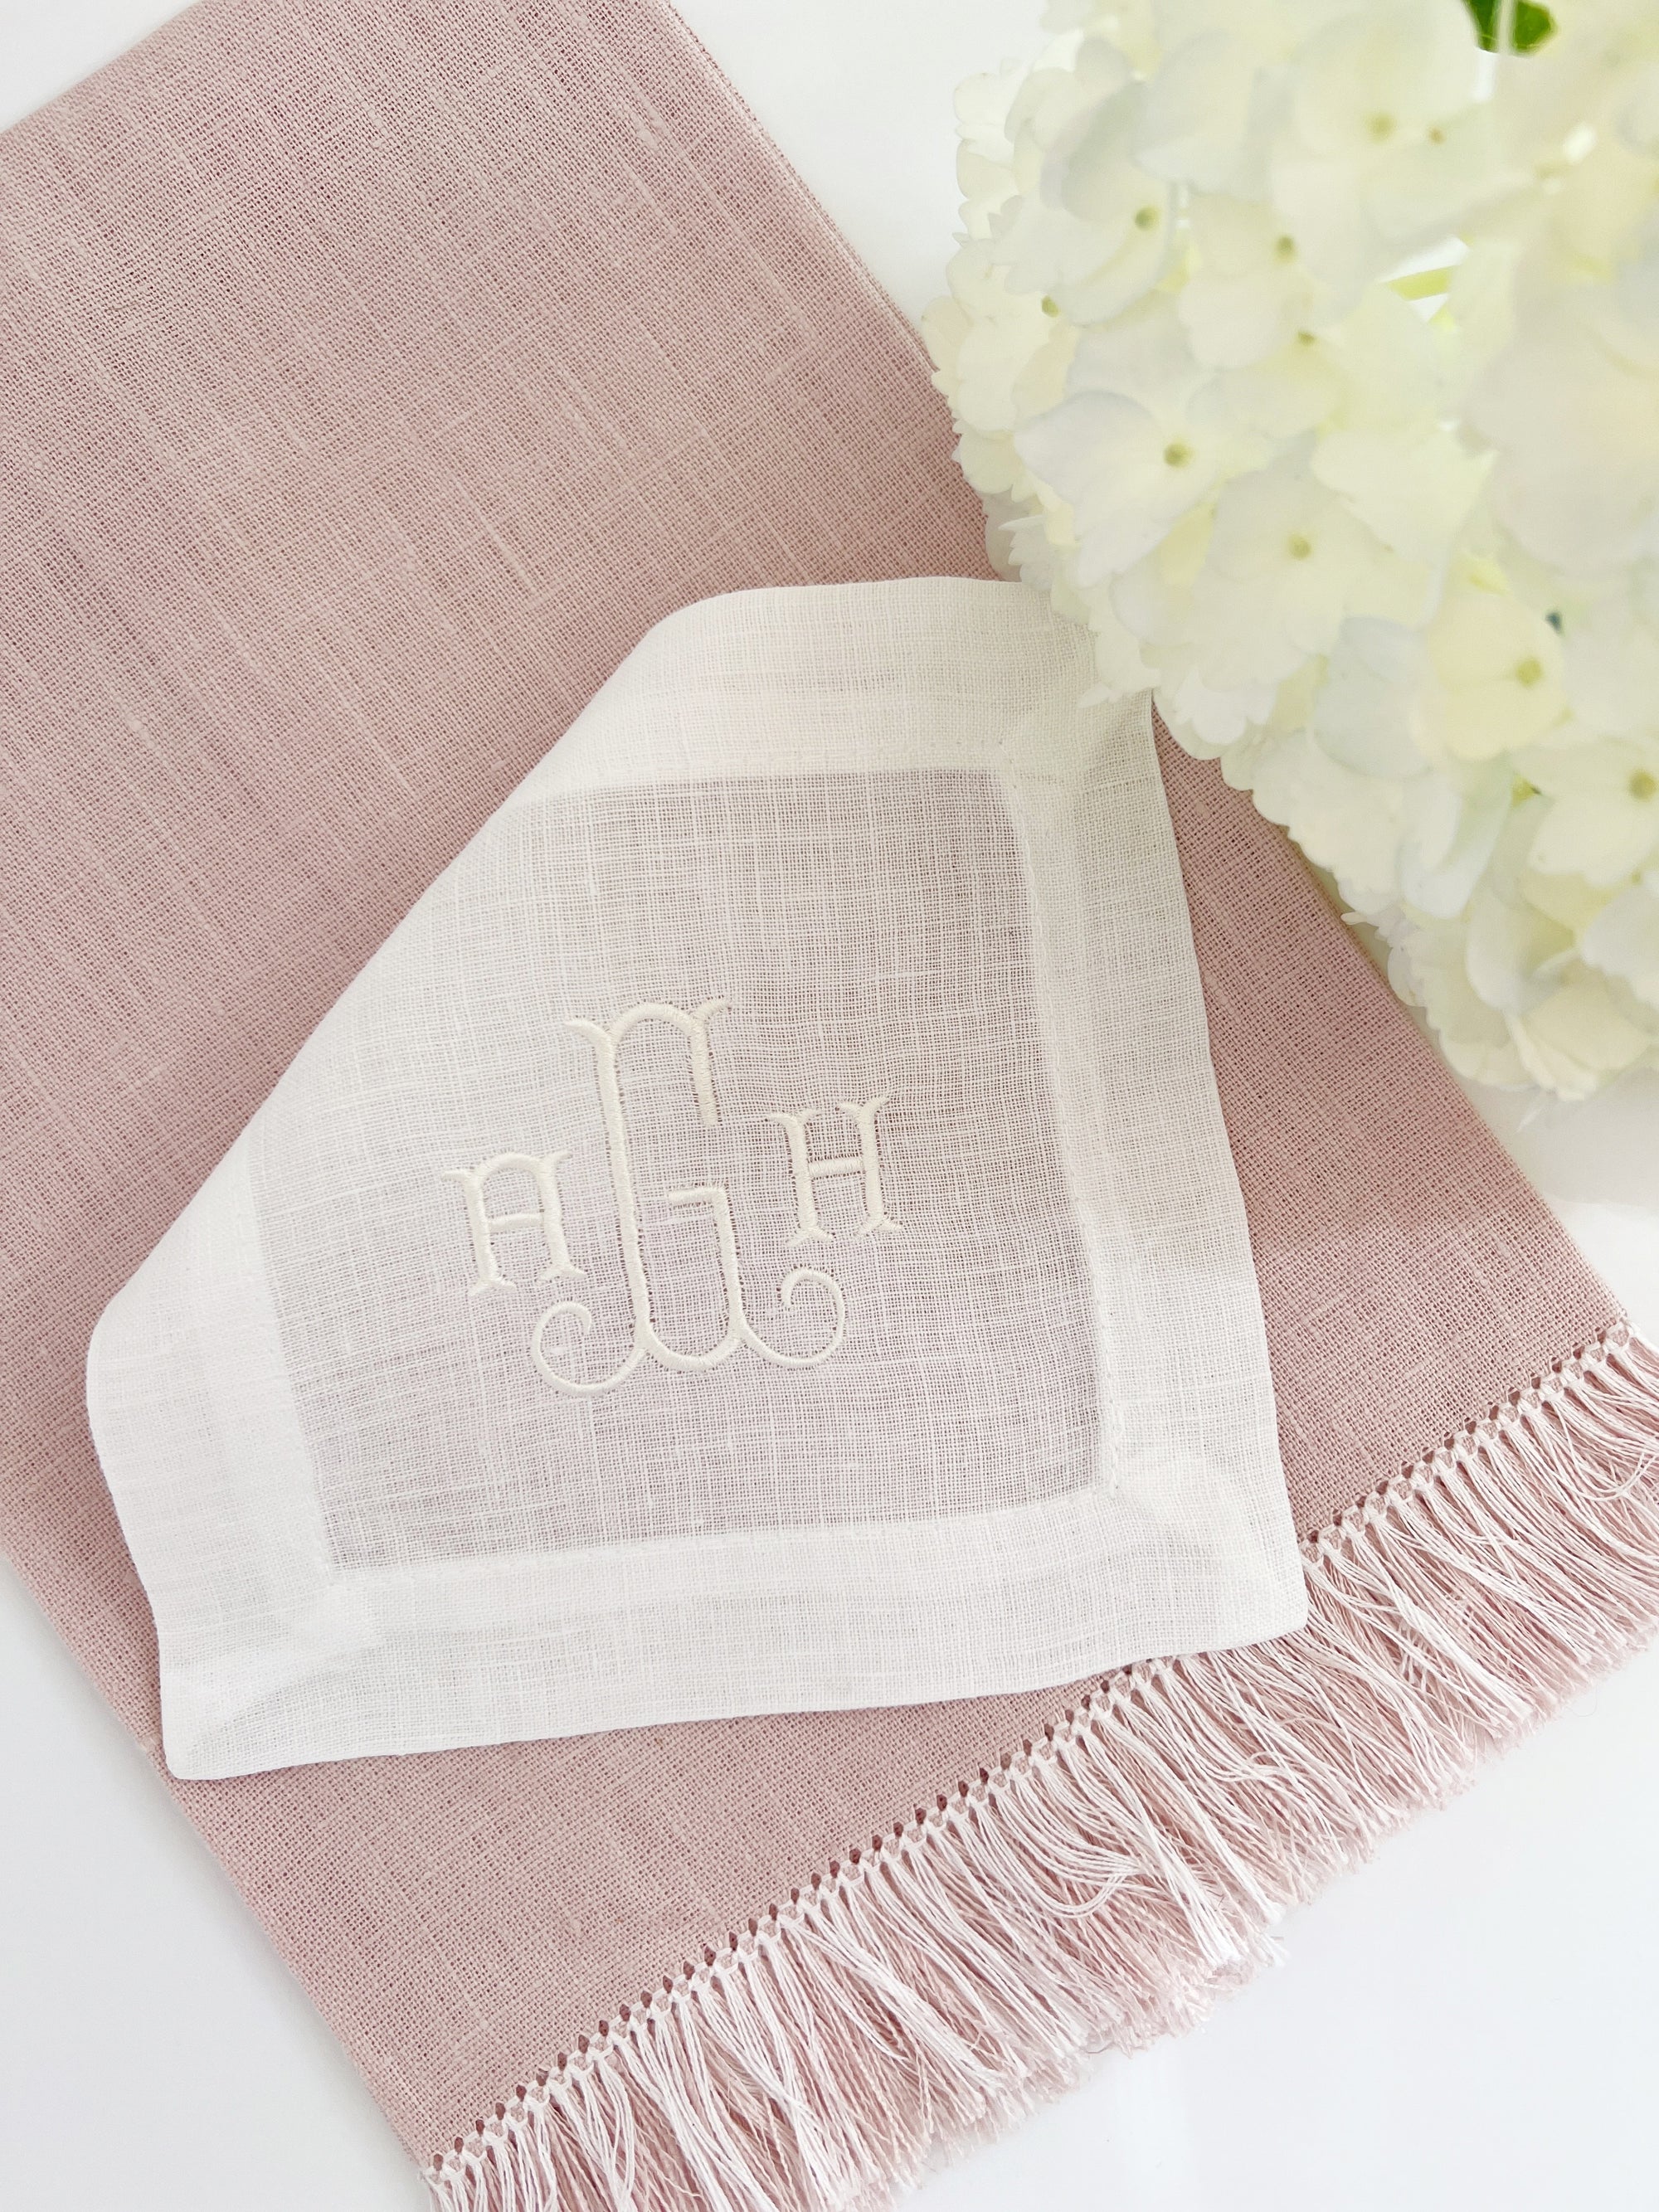 Monogrammed Fringe Guest Towels in pink, blue, and green